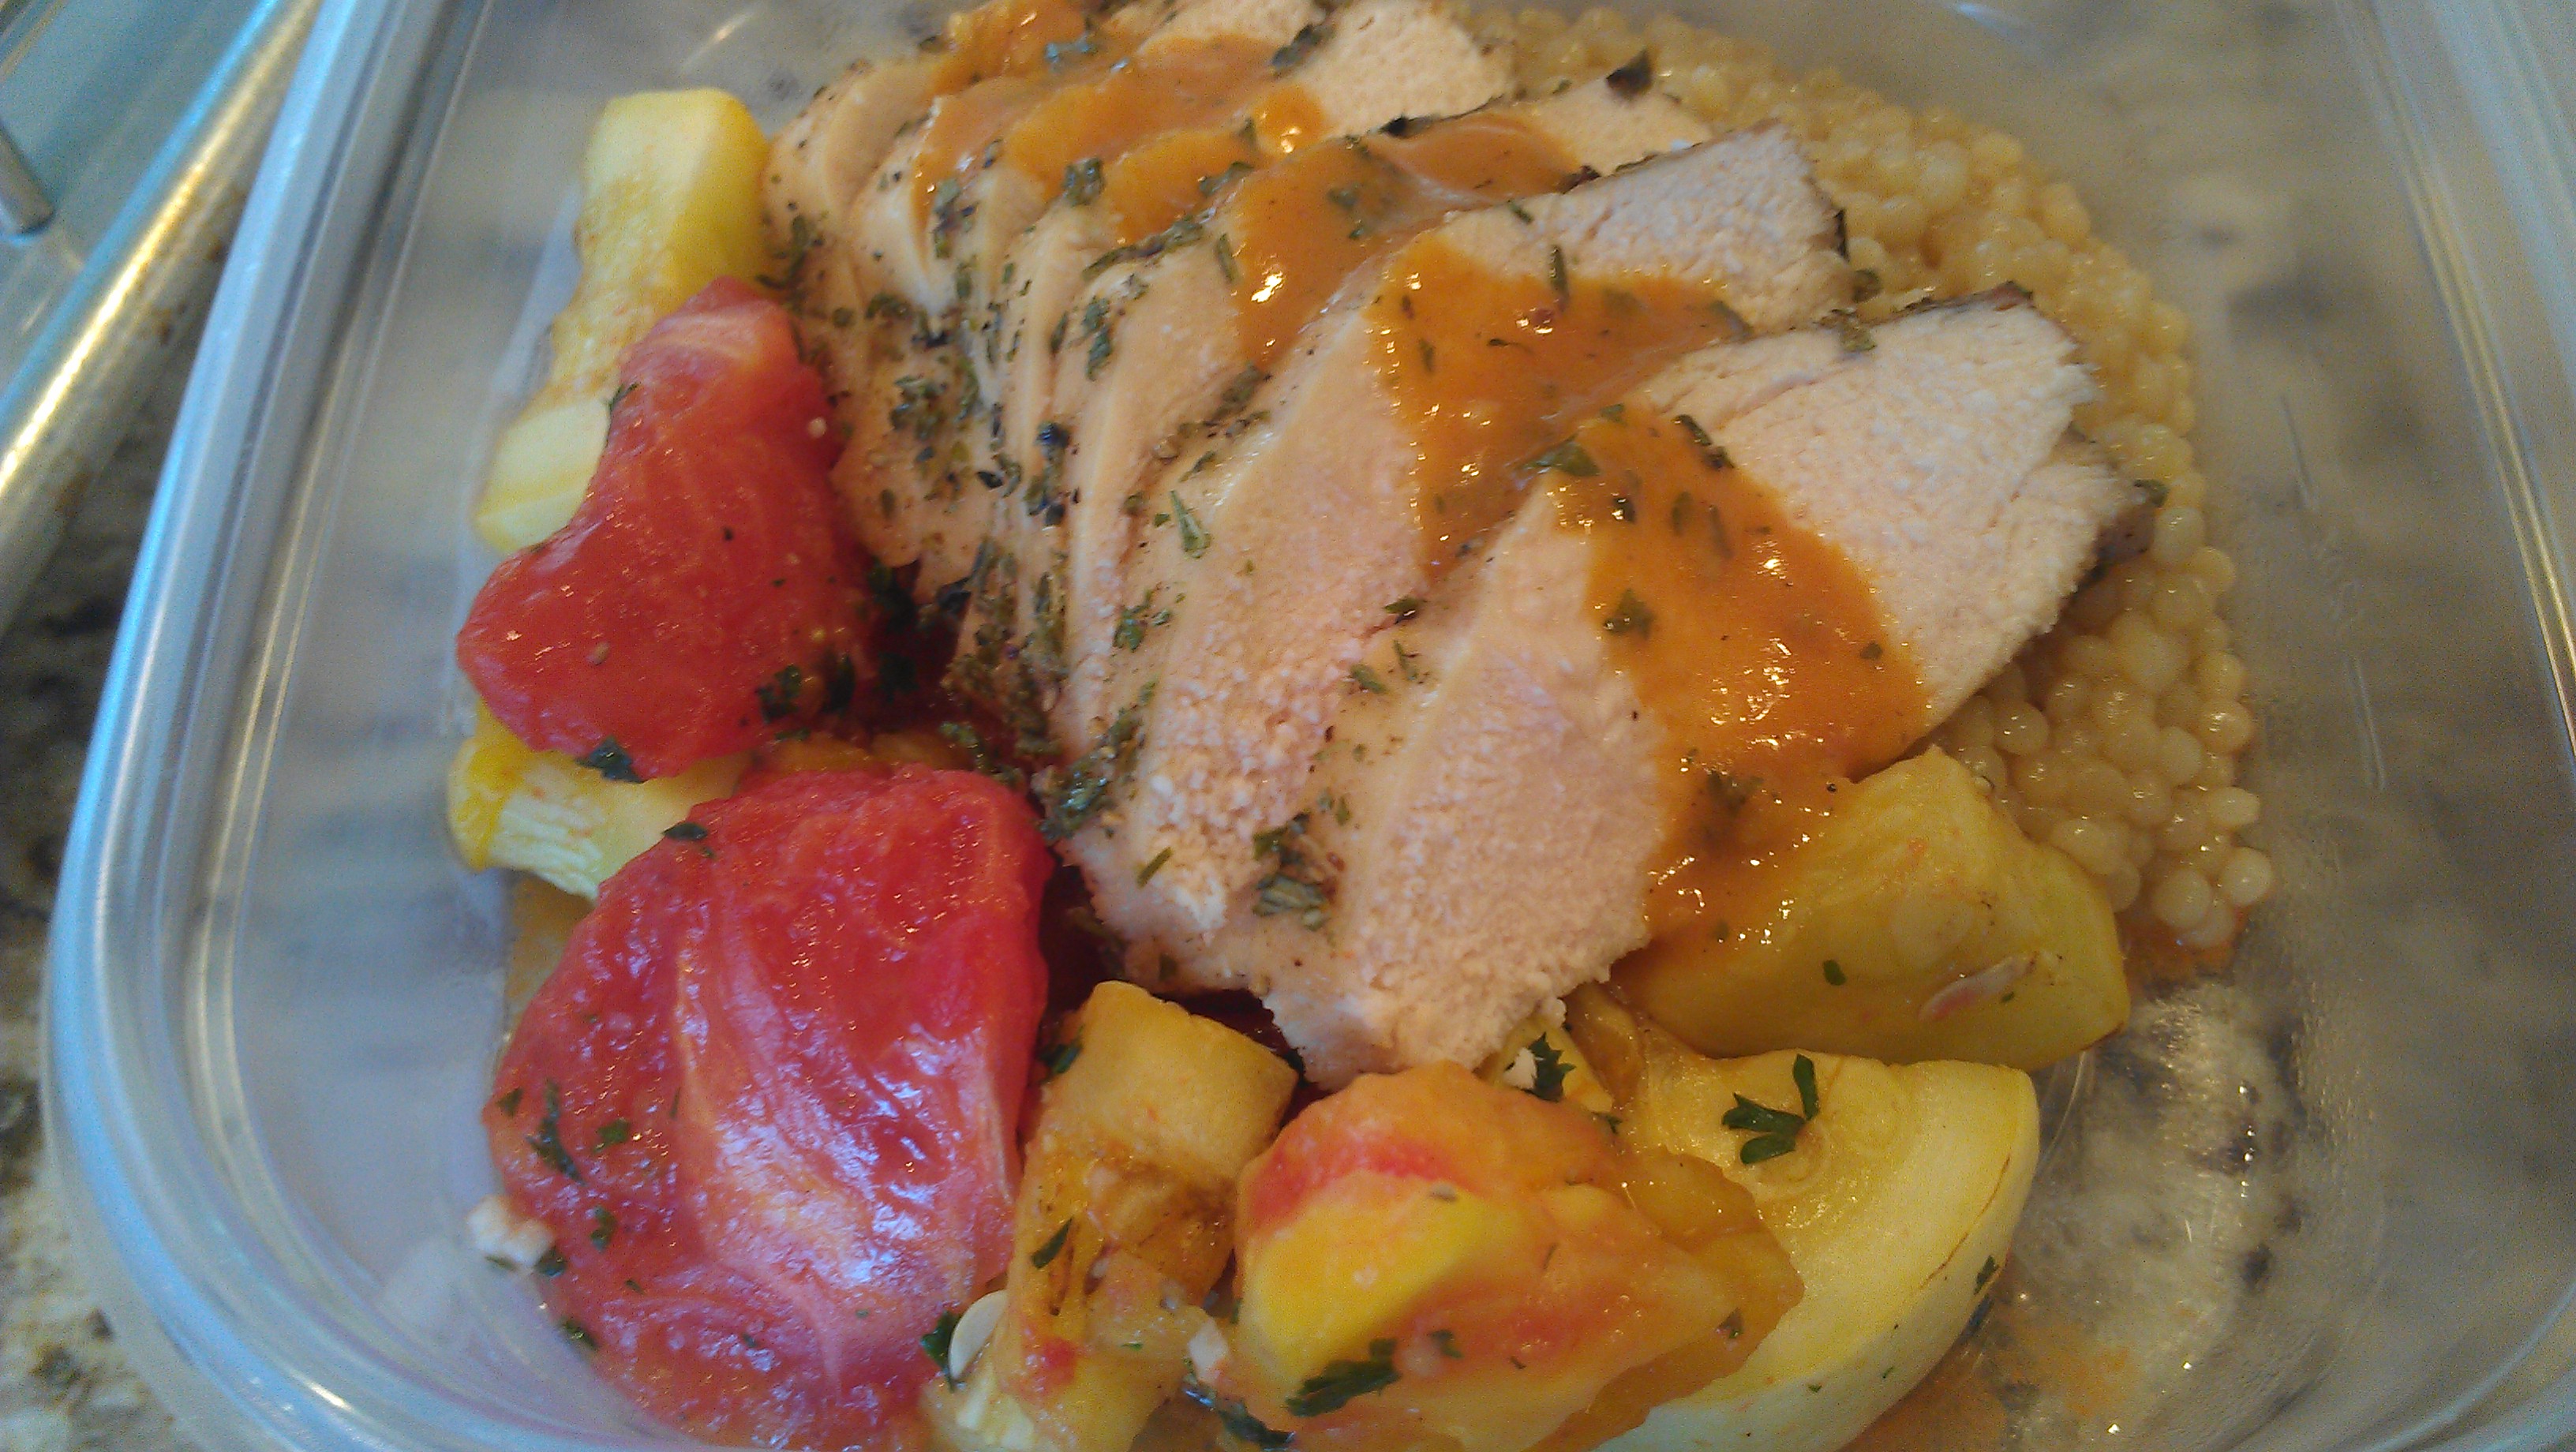 Roasted chicken breast and local tomato butter